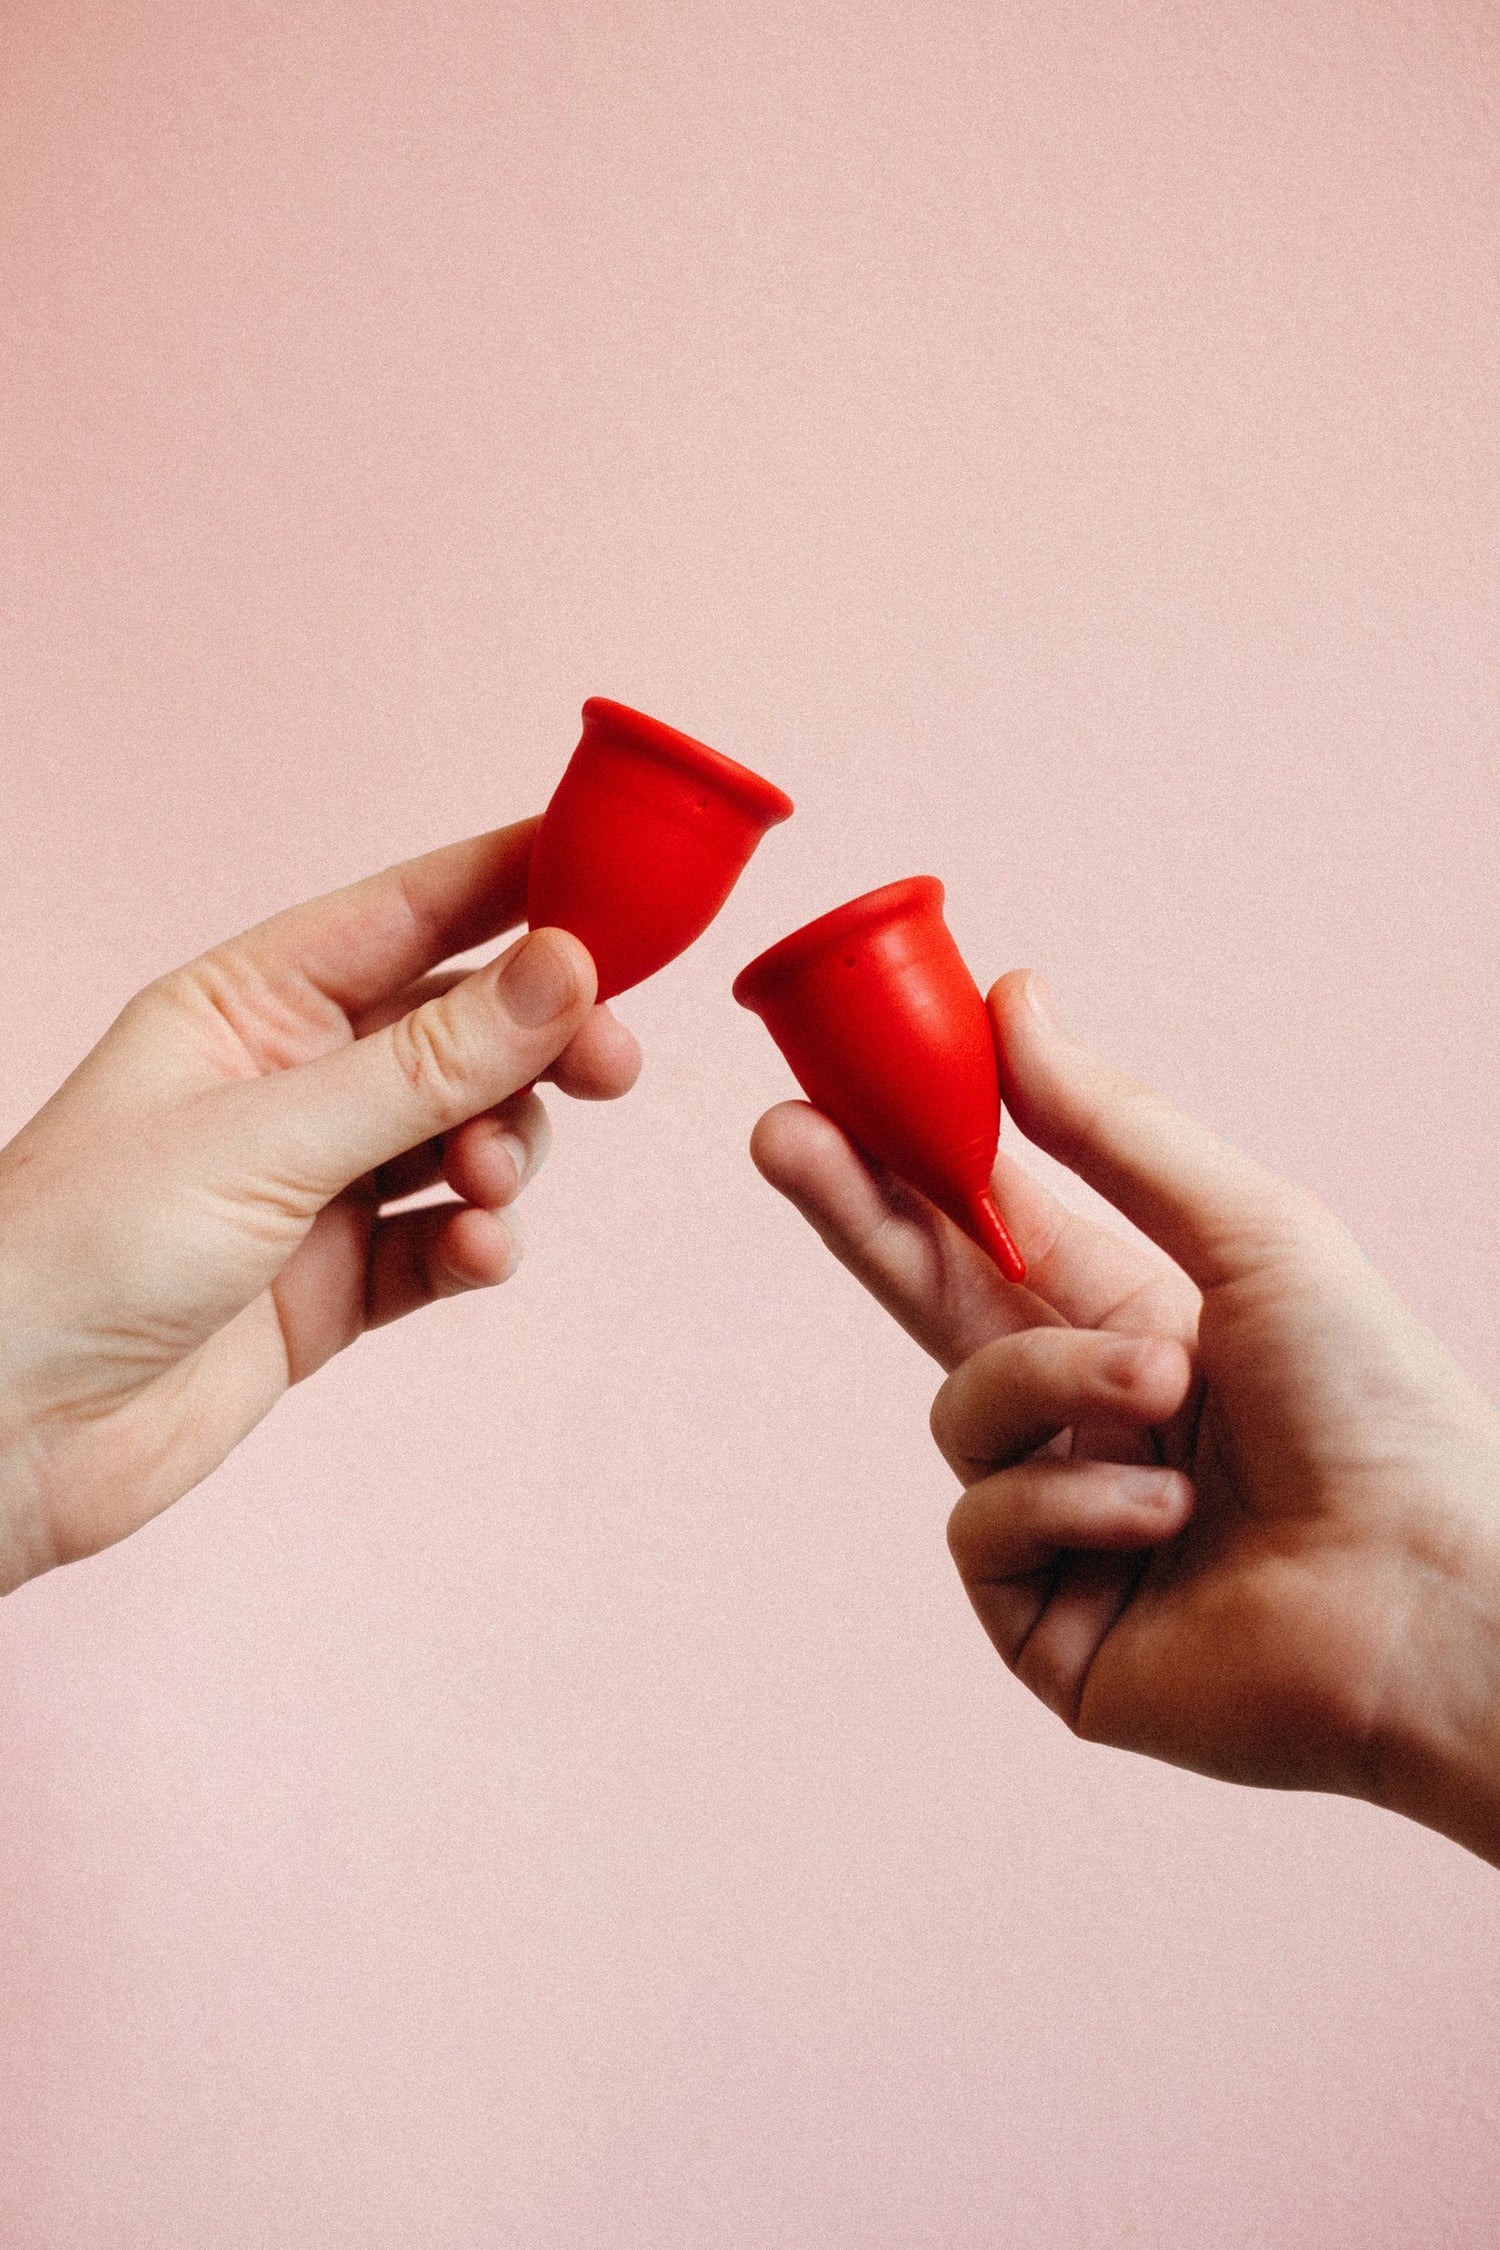 A Personal Review of the Menstrual Cup